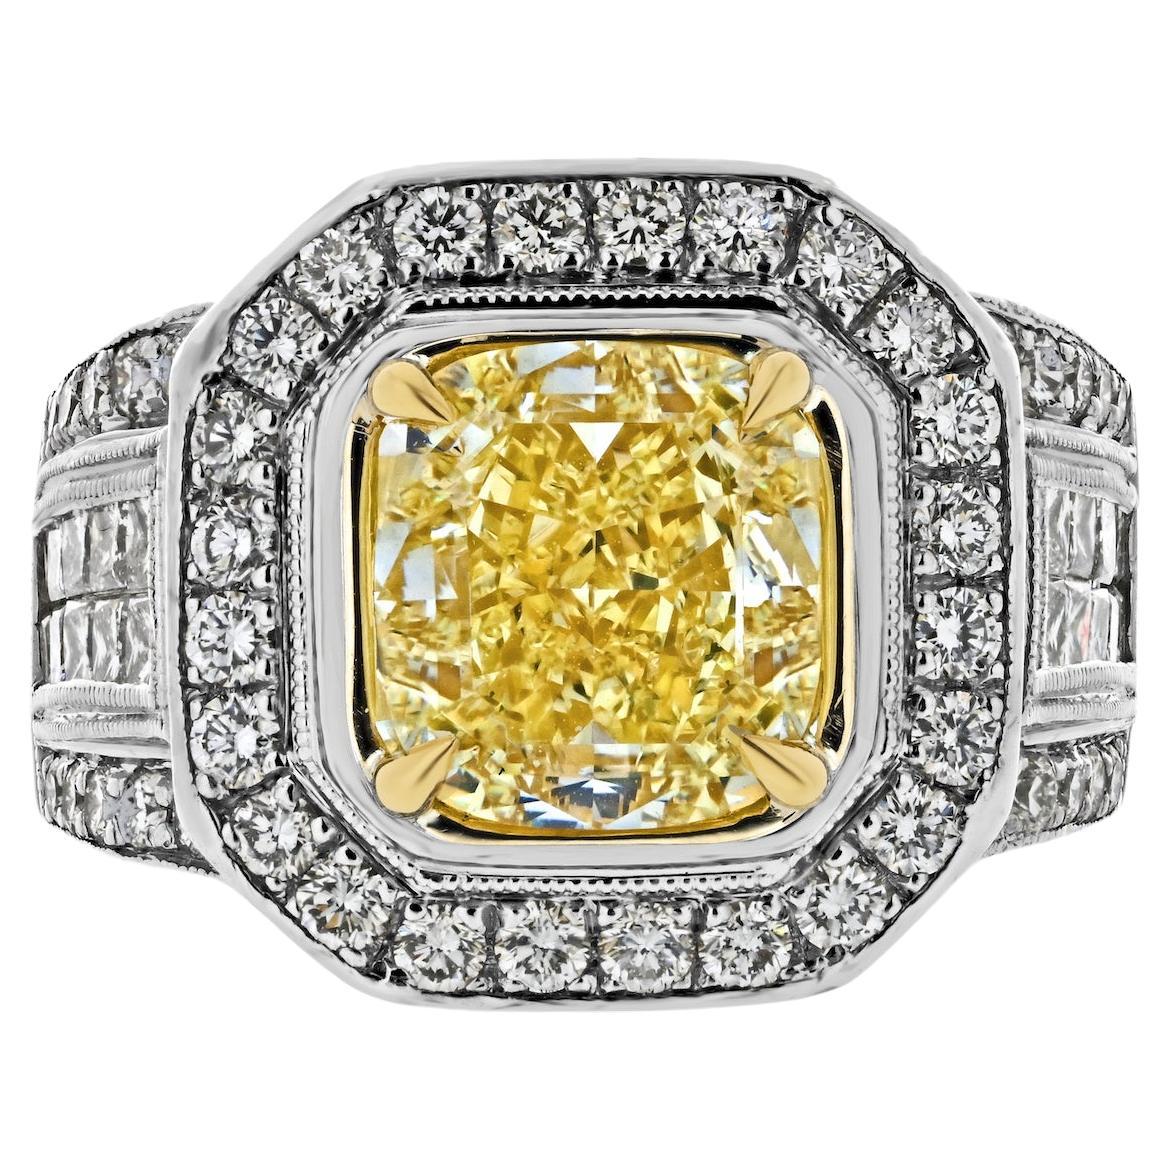 3.20ct Fancy Yellow Intense Cushion Cut Diamond Engagement Ring For Sale